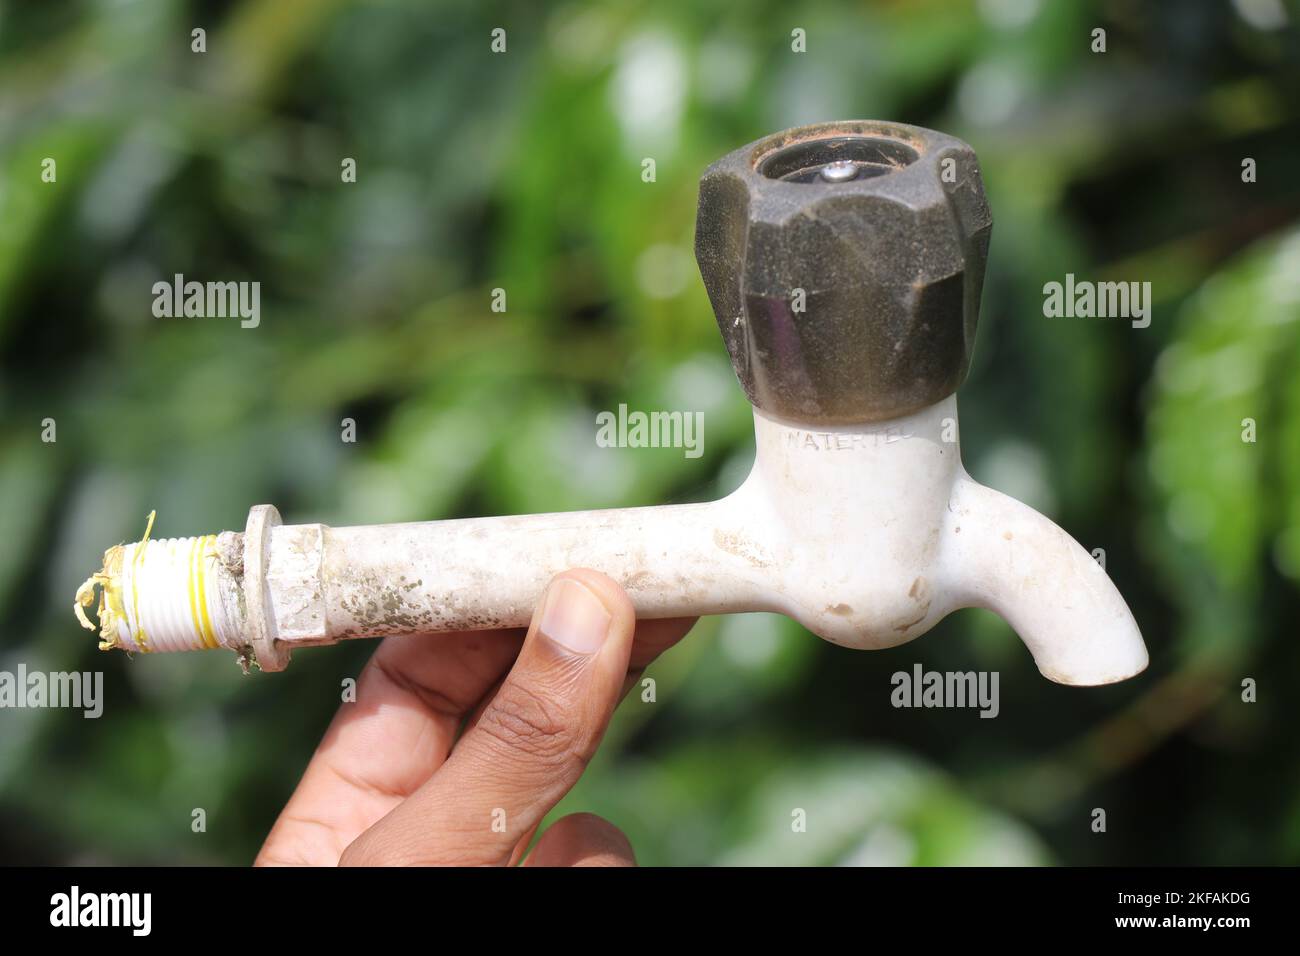 Old water tap or kitchen faucet held in hand on outdoors with natural background Stock Photo